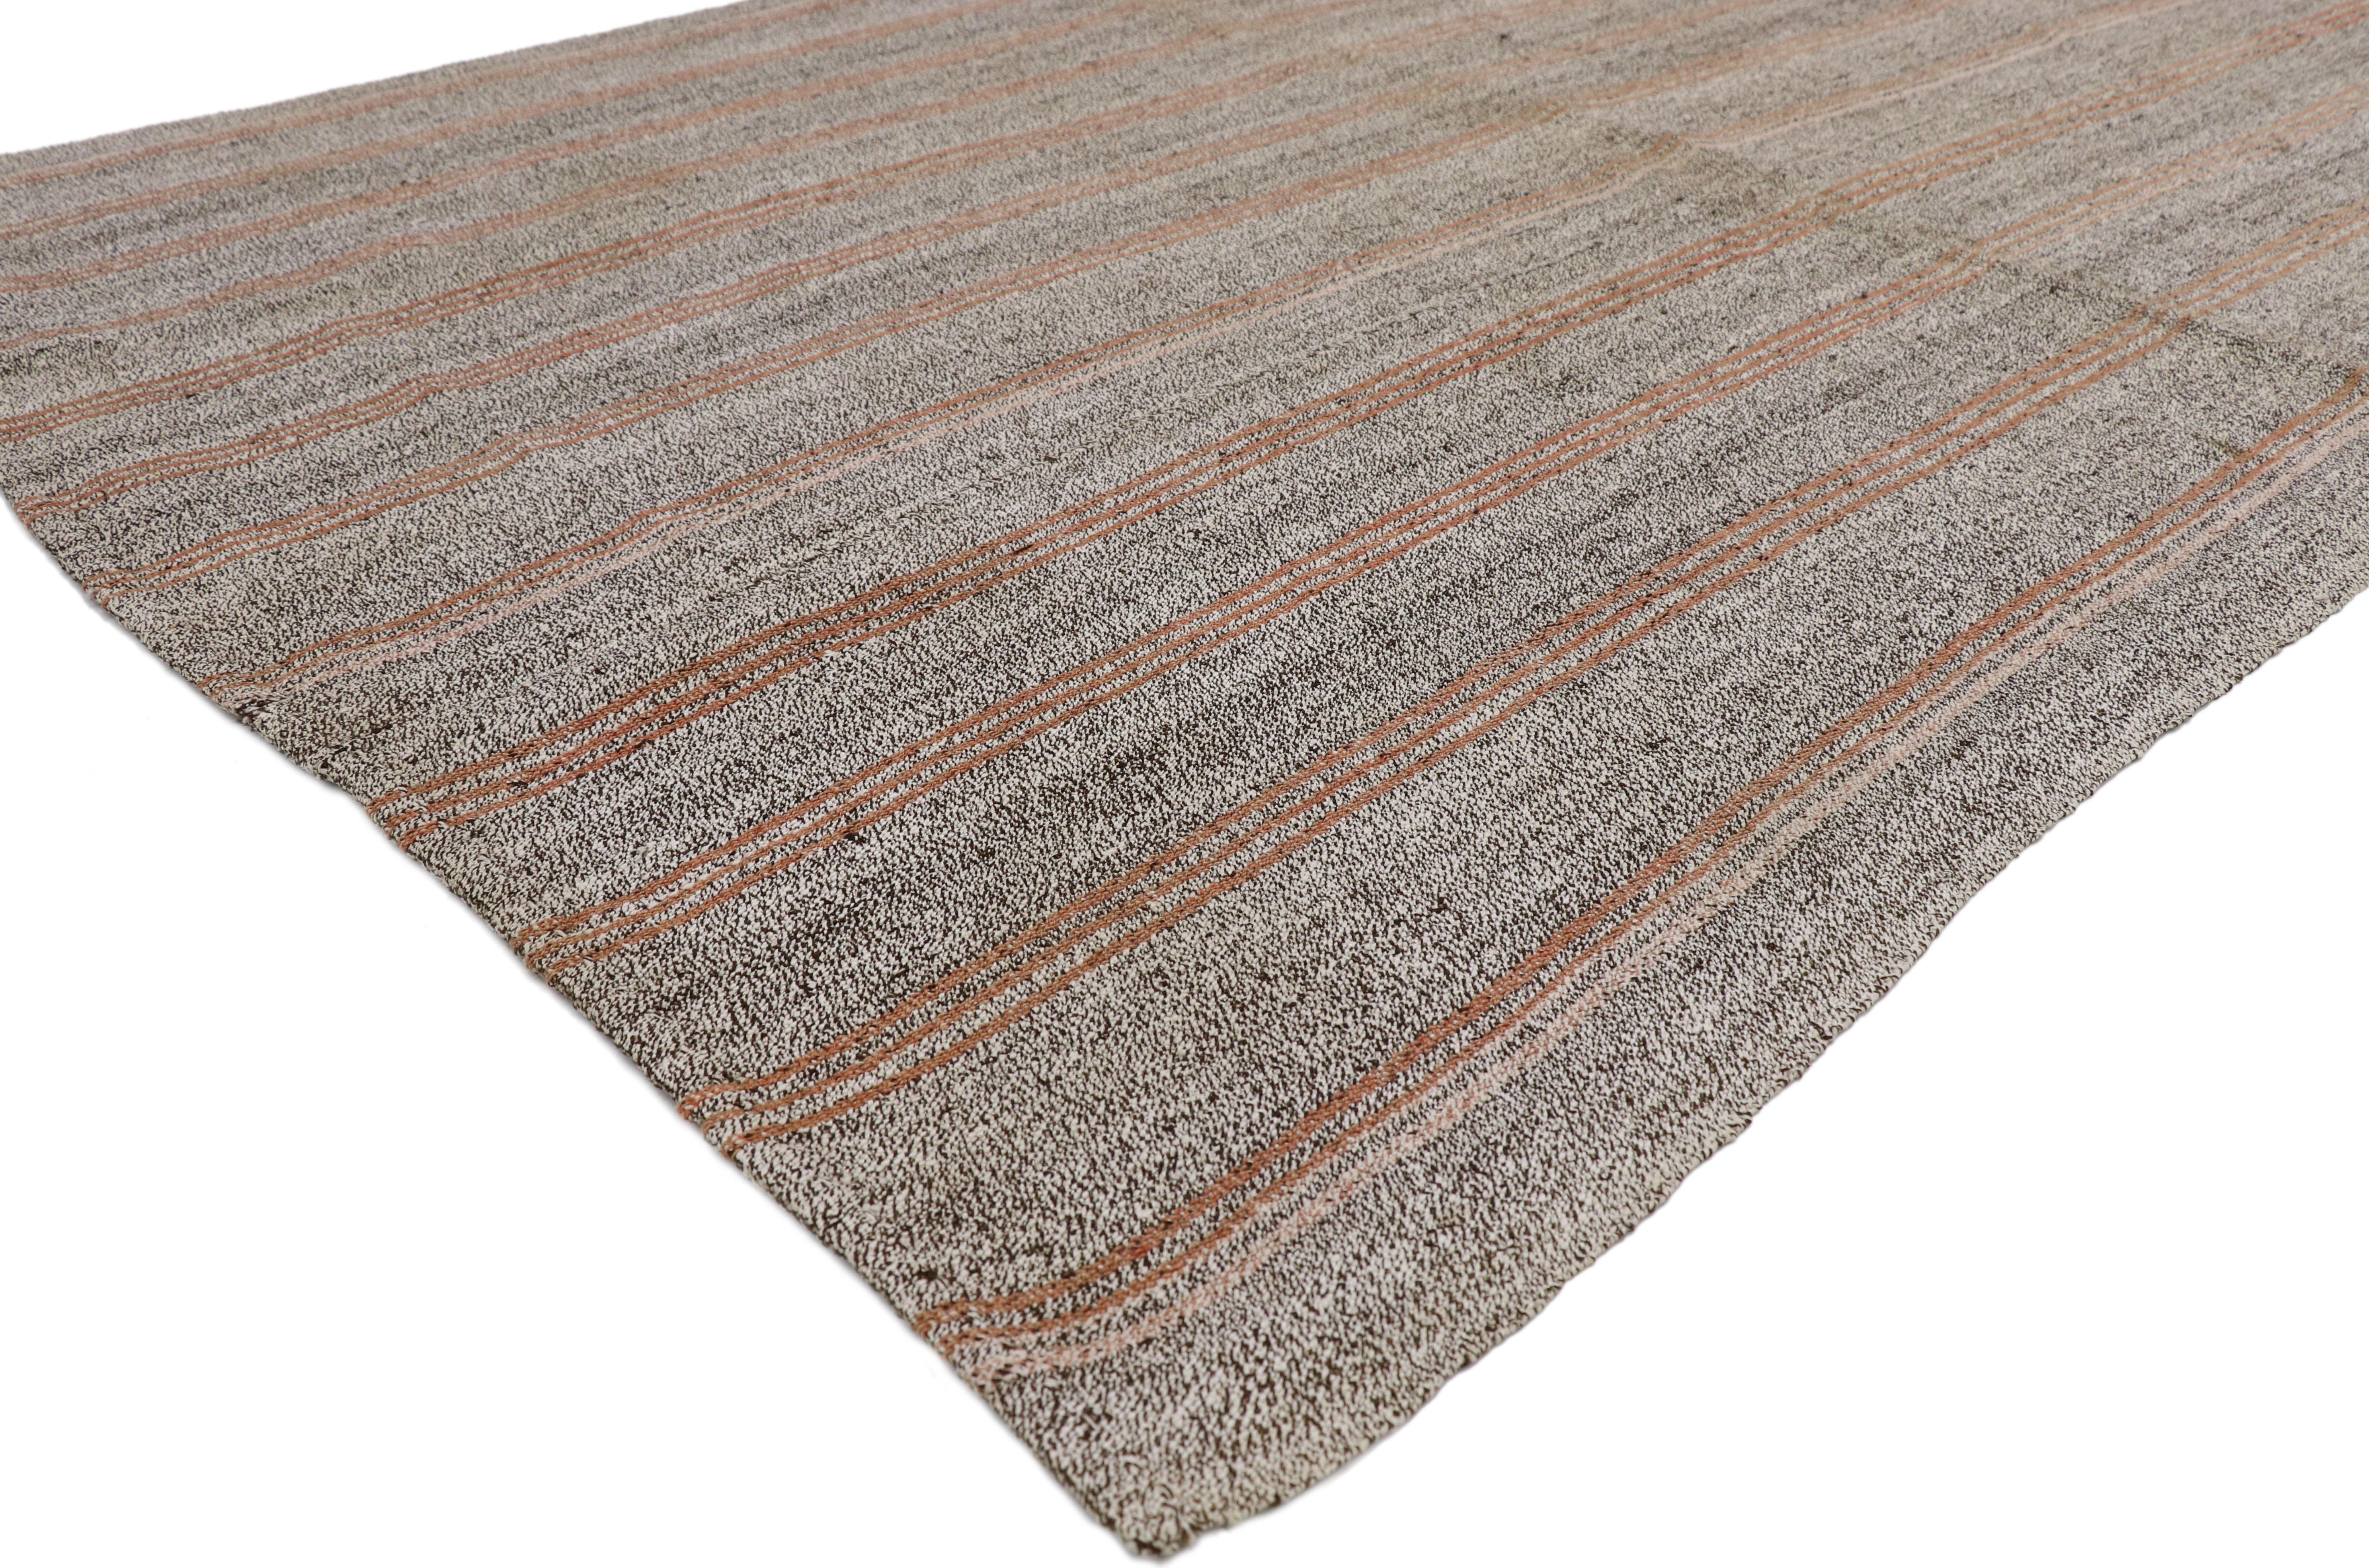 50900, vintage Turkish Kilim with Rustic Industrial style, Striped Kilim rug. This handwoven vintage Turkish Kilim handsomely highlights modern Industrial style. A fine combination of simplicity and Industrial chic, this striped Kilim rug features